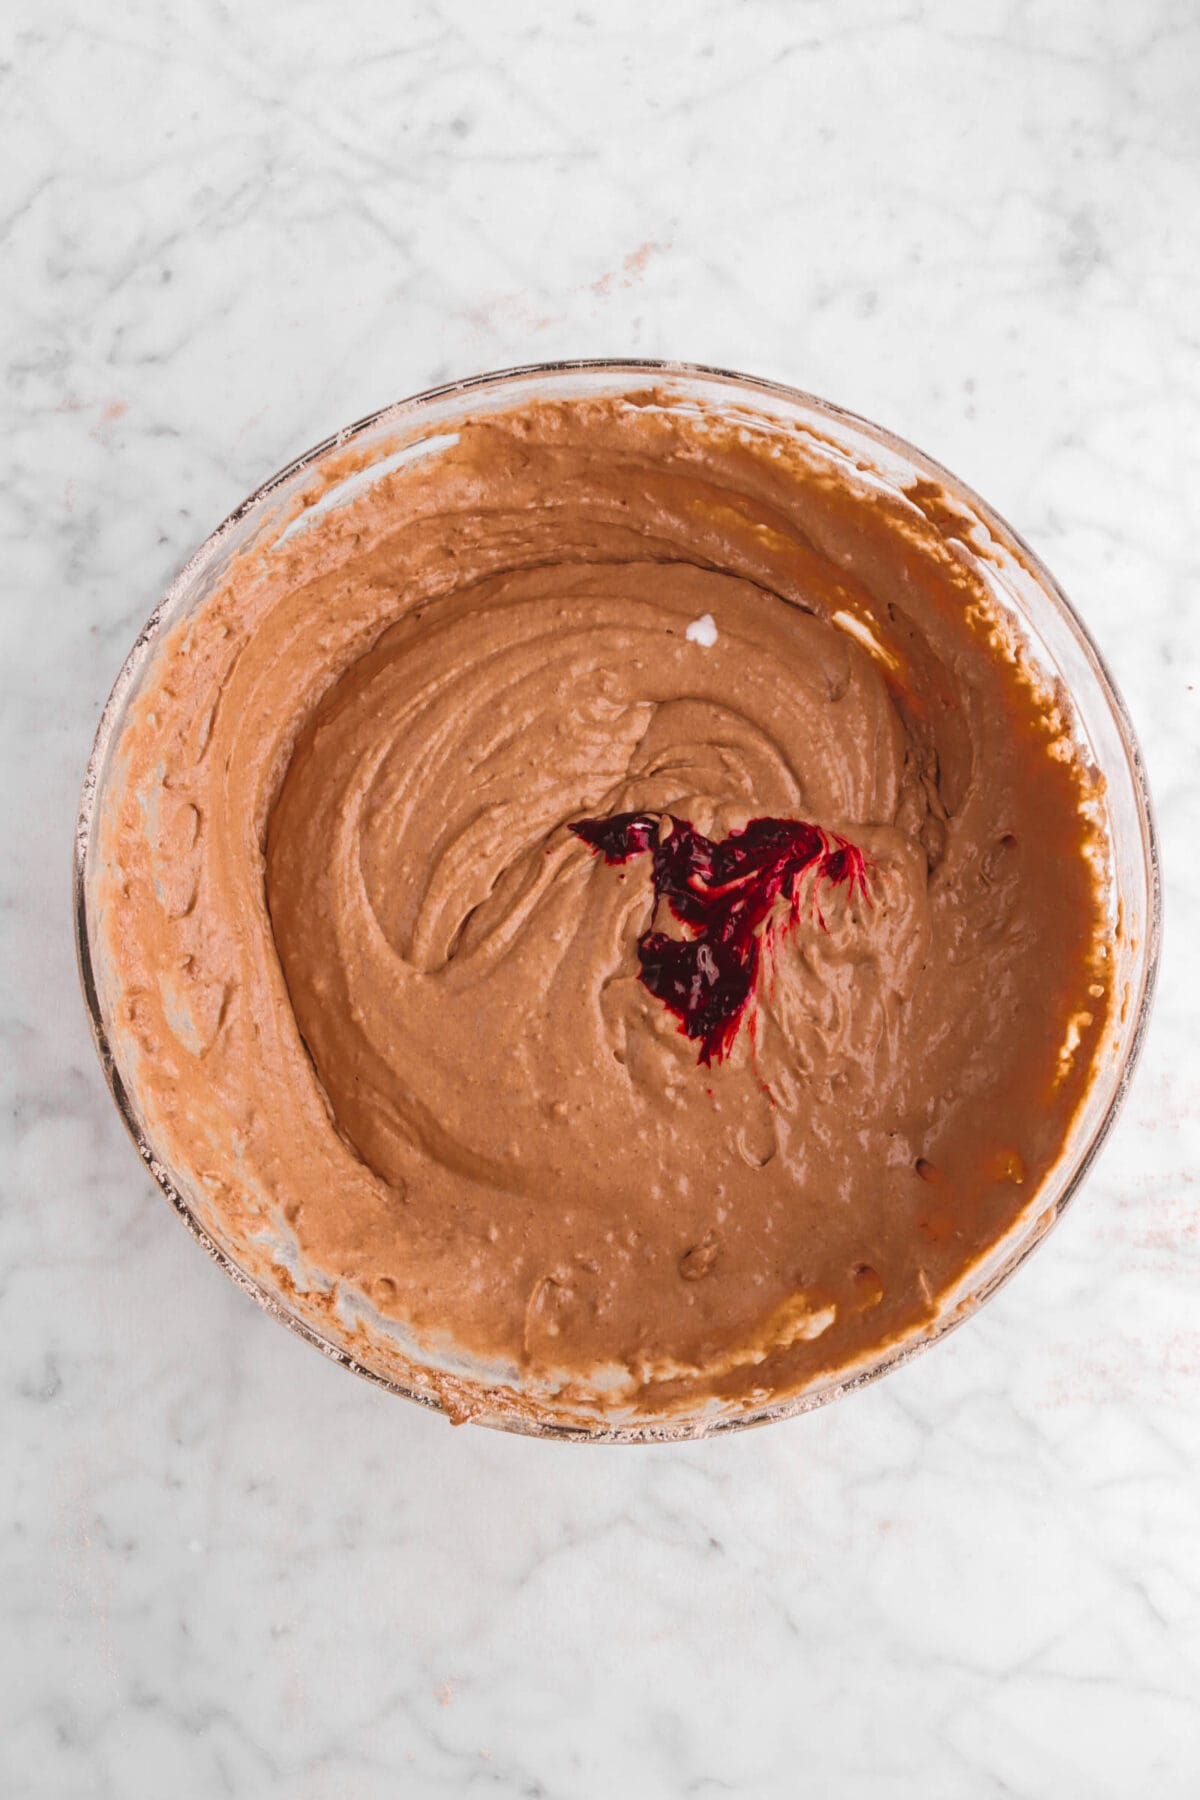 red food dye added to chocolate batter in glass bowl